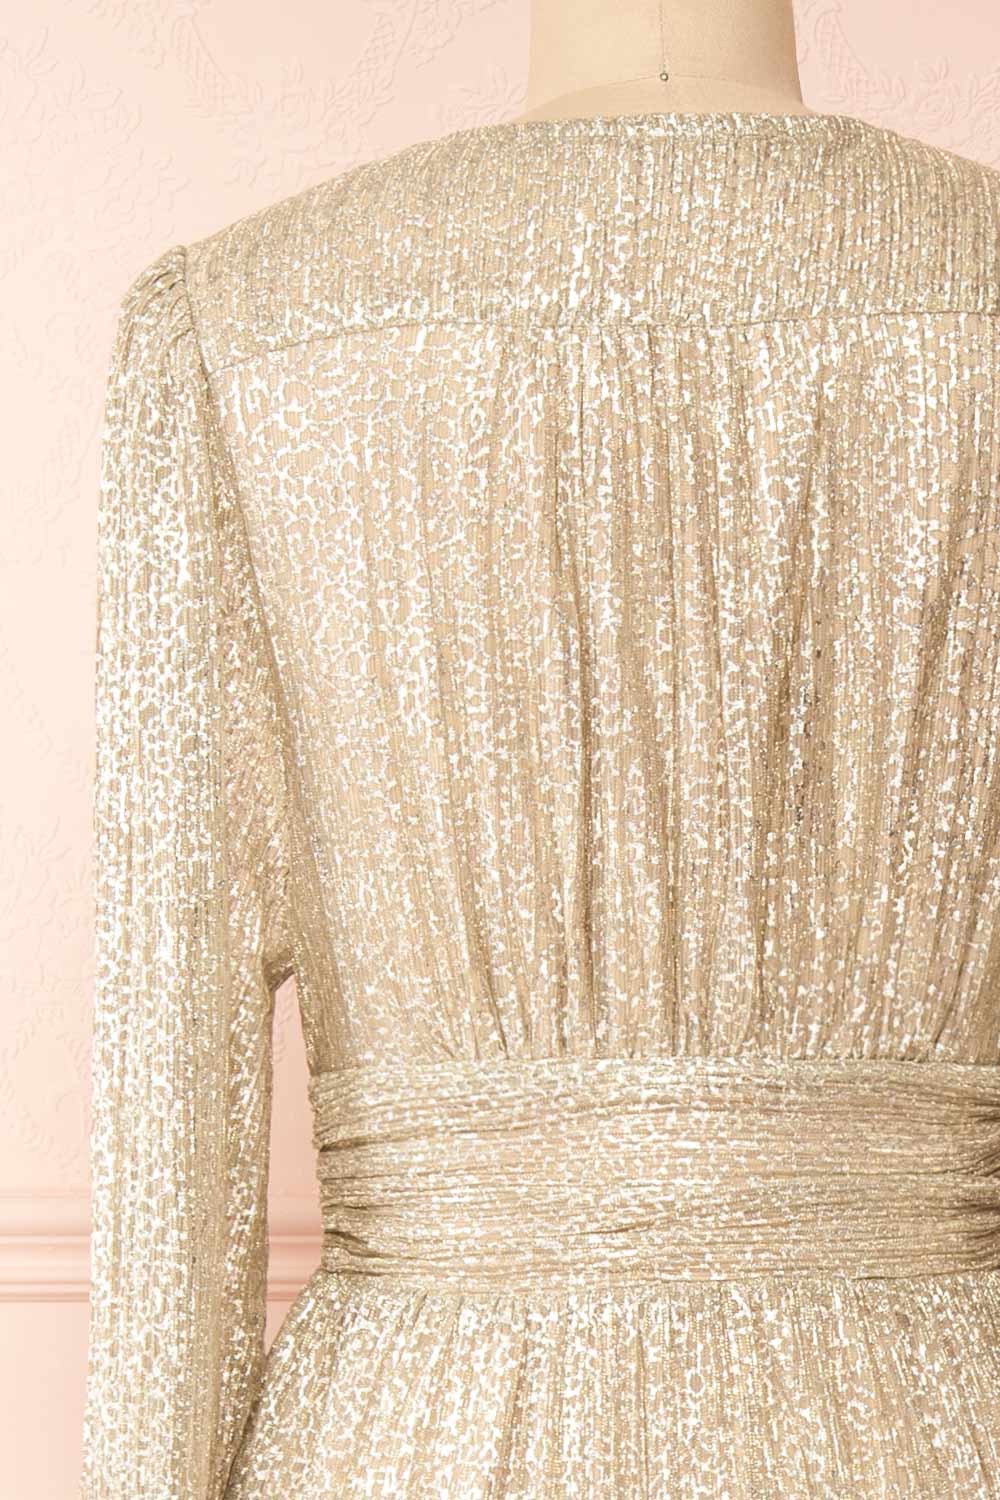 Kennedy Shimmery Patterned Maxi Dress | Boutique 1861 back close-up